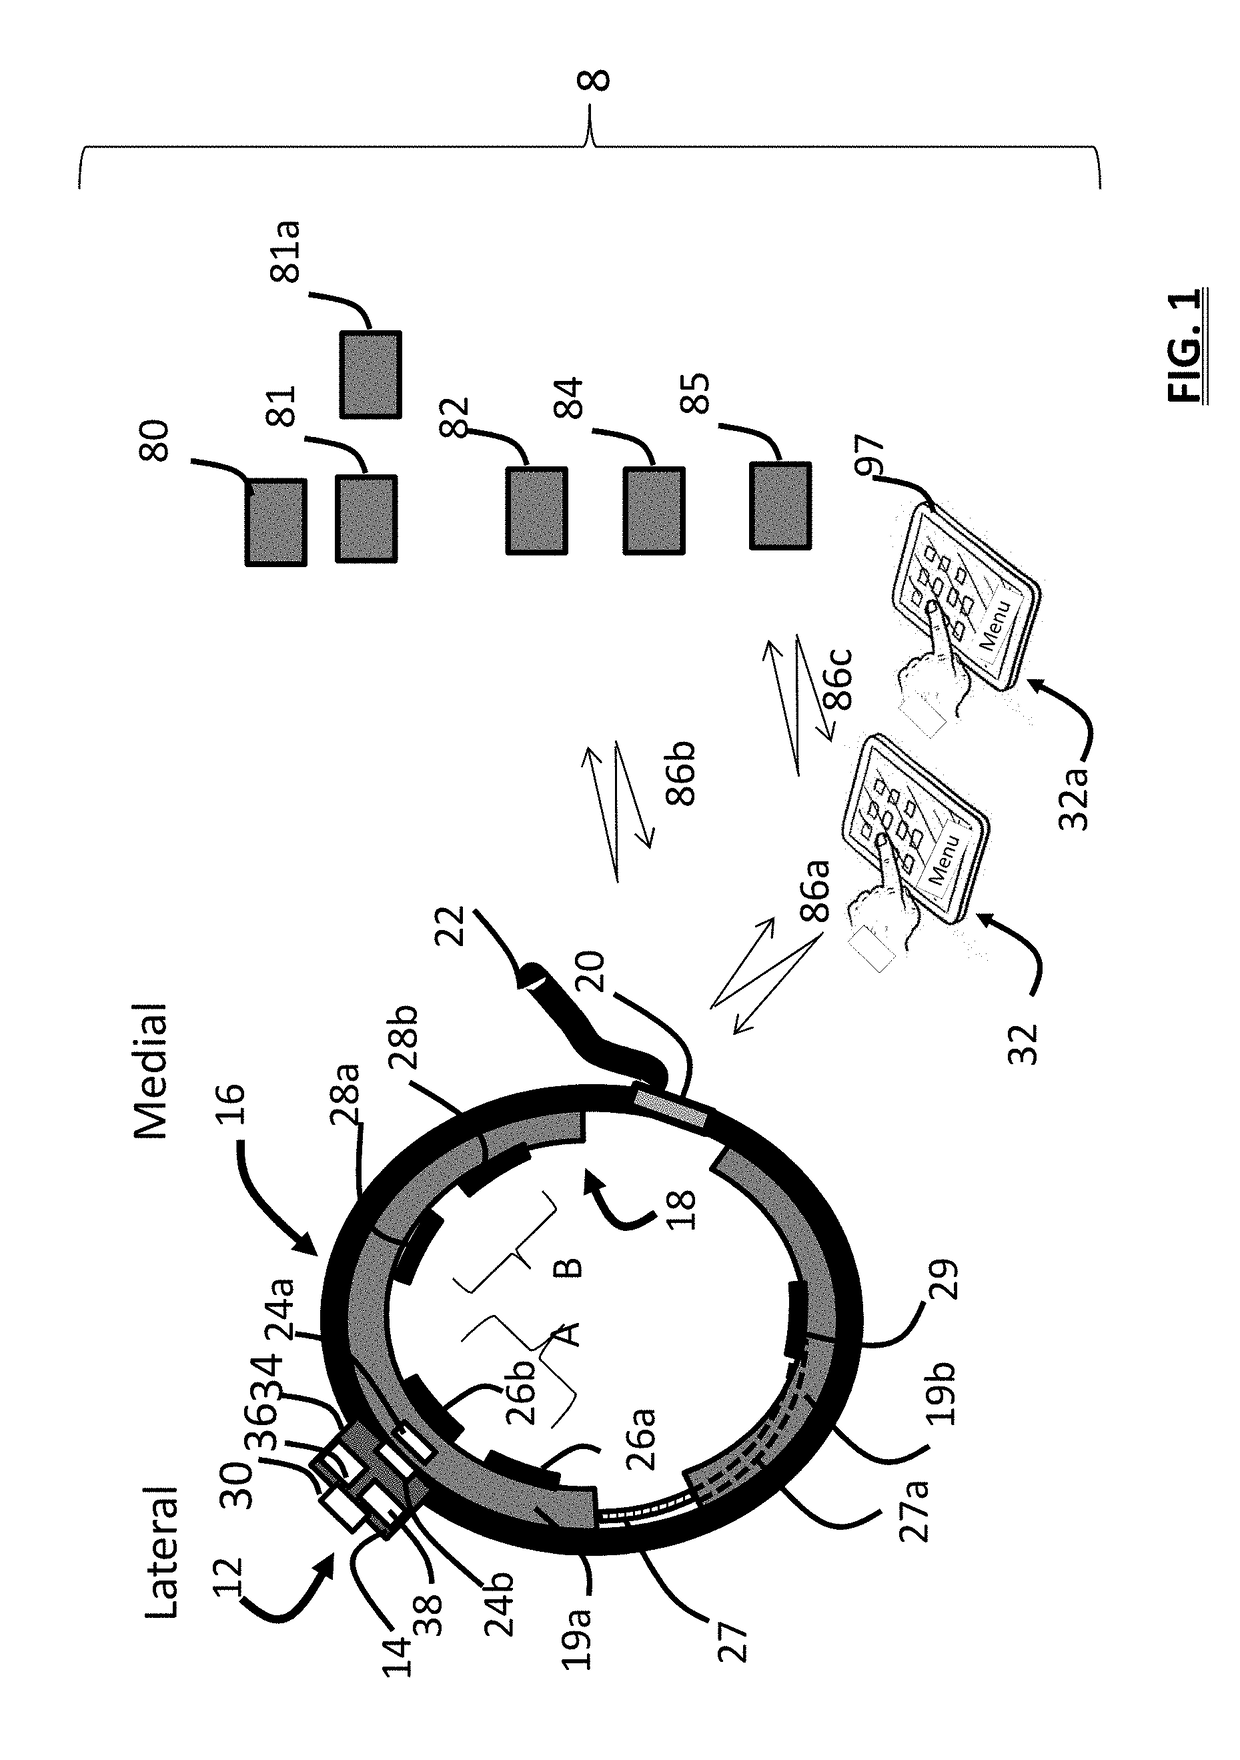 Systems and methods for providing patient signaling and contingent stimulation